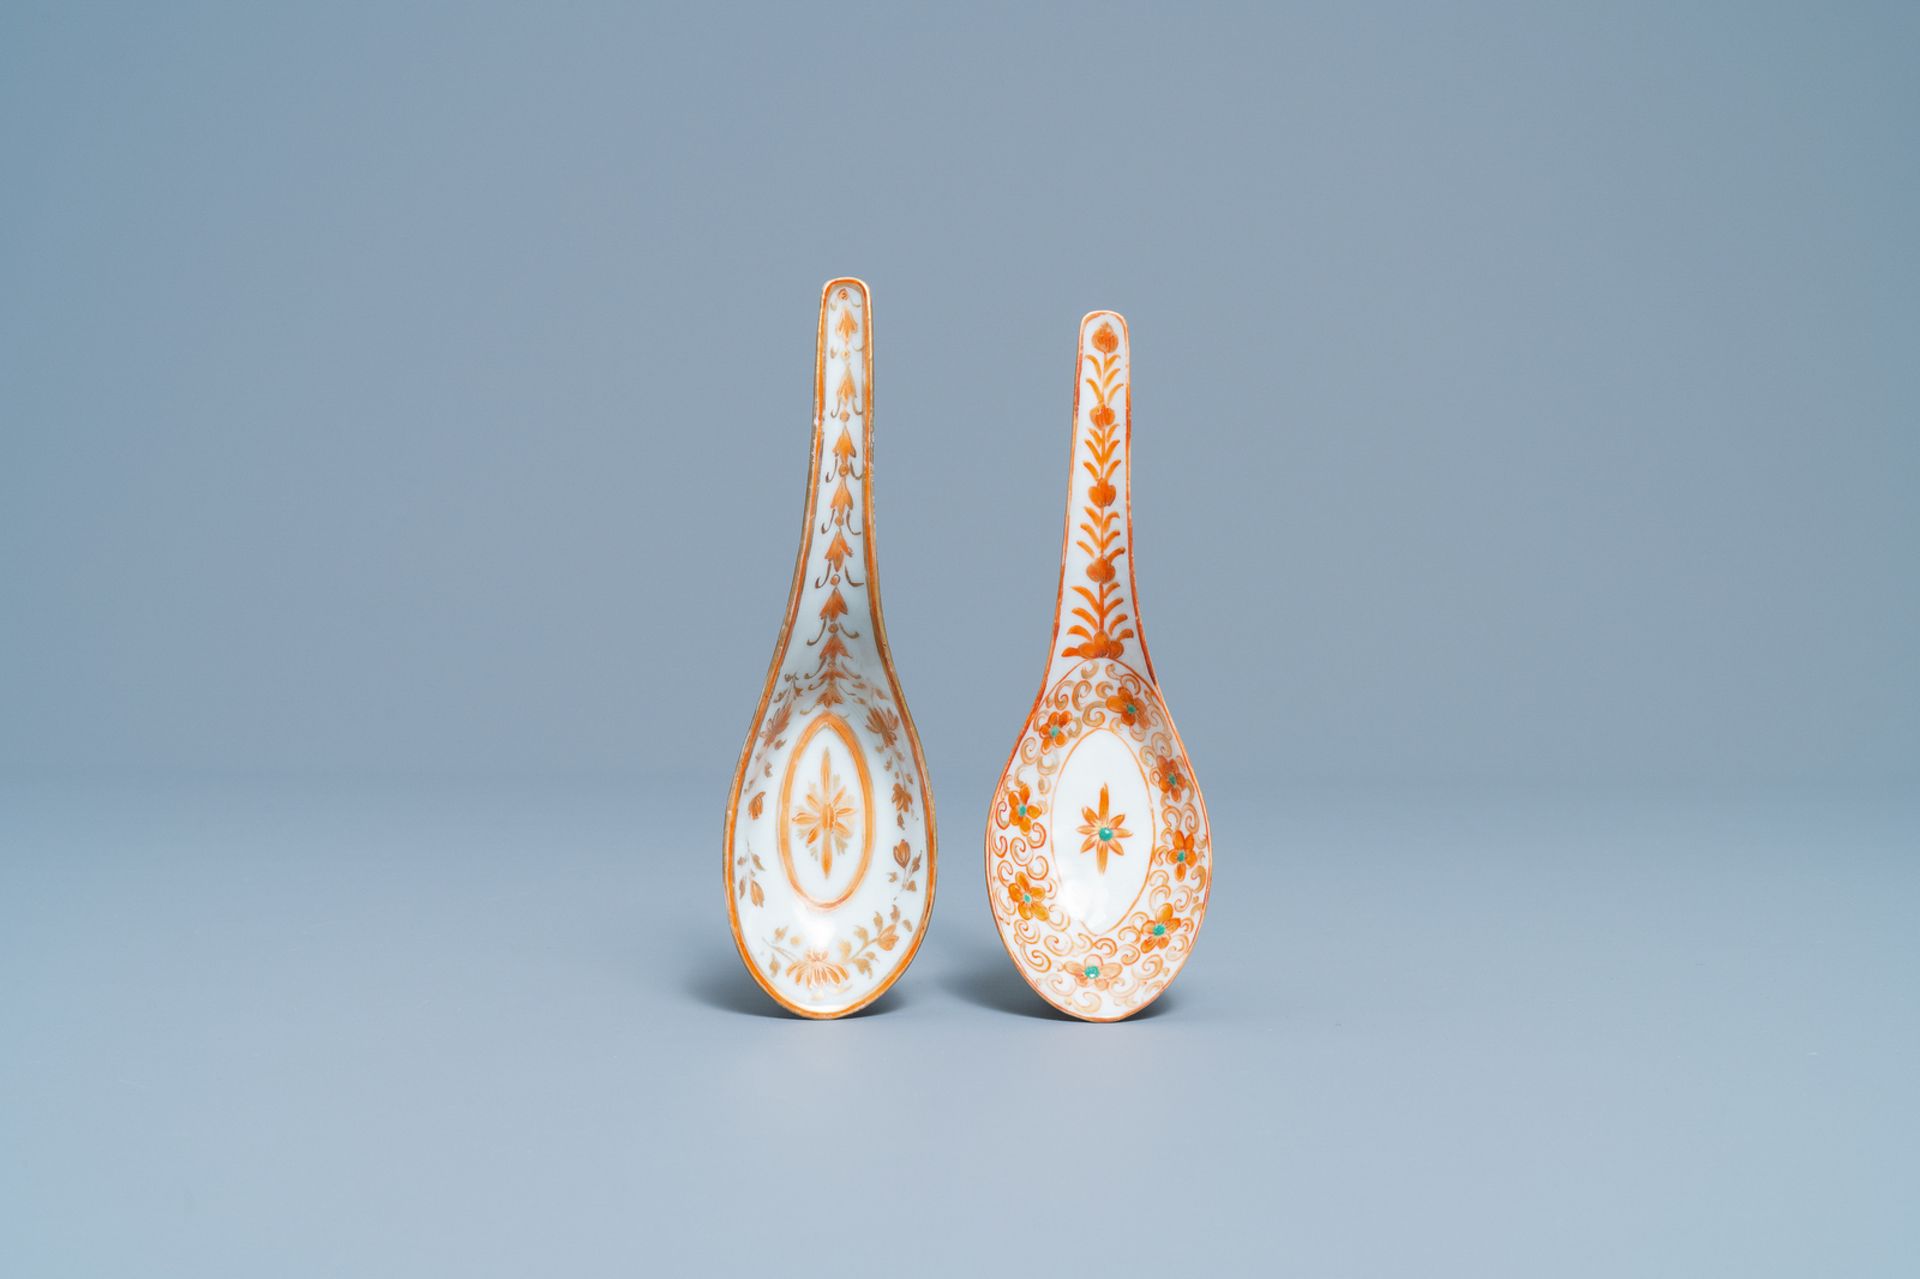 Two Chinese Thai market Lai Nam Thong spoons, 19th C. - Image 2 of 5